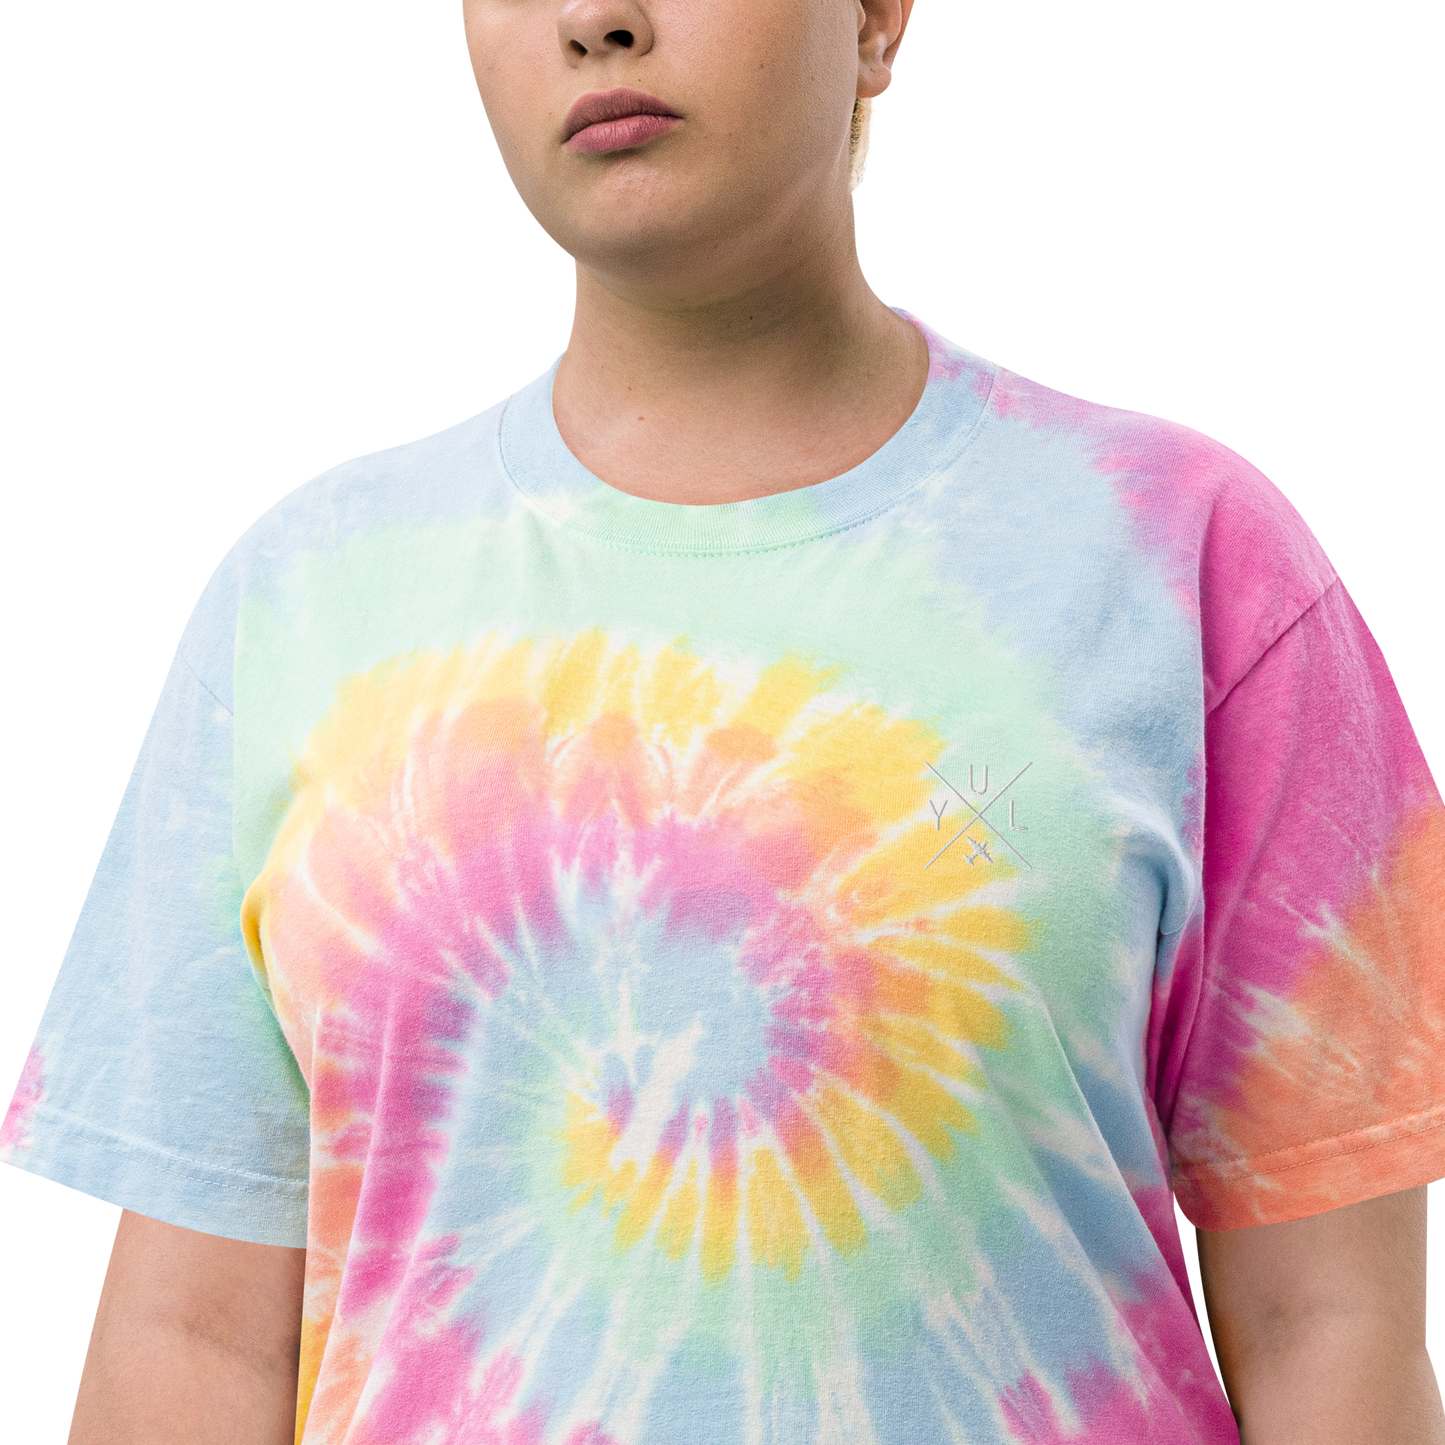 YHM Designs - YUL Montreal Oversized Tie-Dye T-Shirt - Crossed-X Design with Airport Code and Vintage Propliner - White Embroidery - Image 13